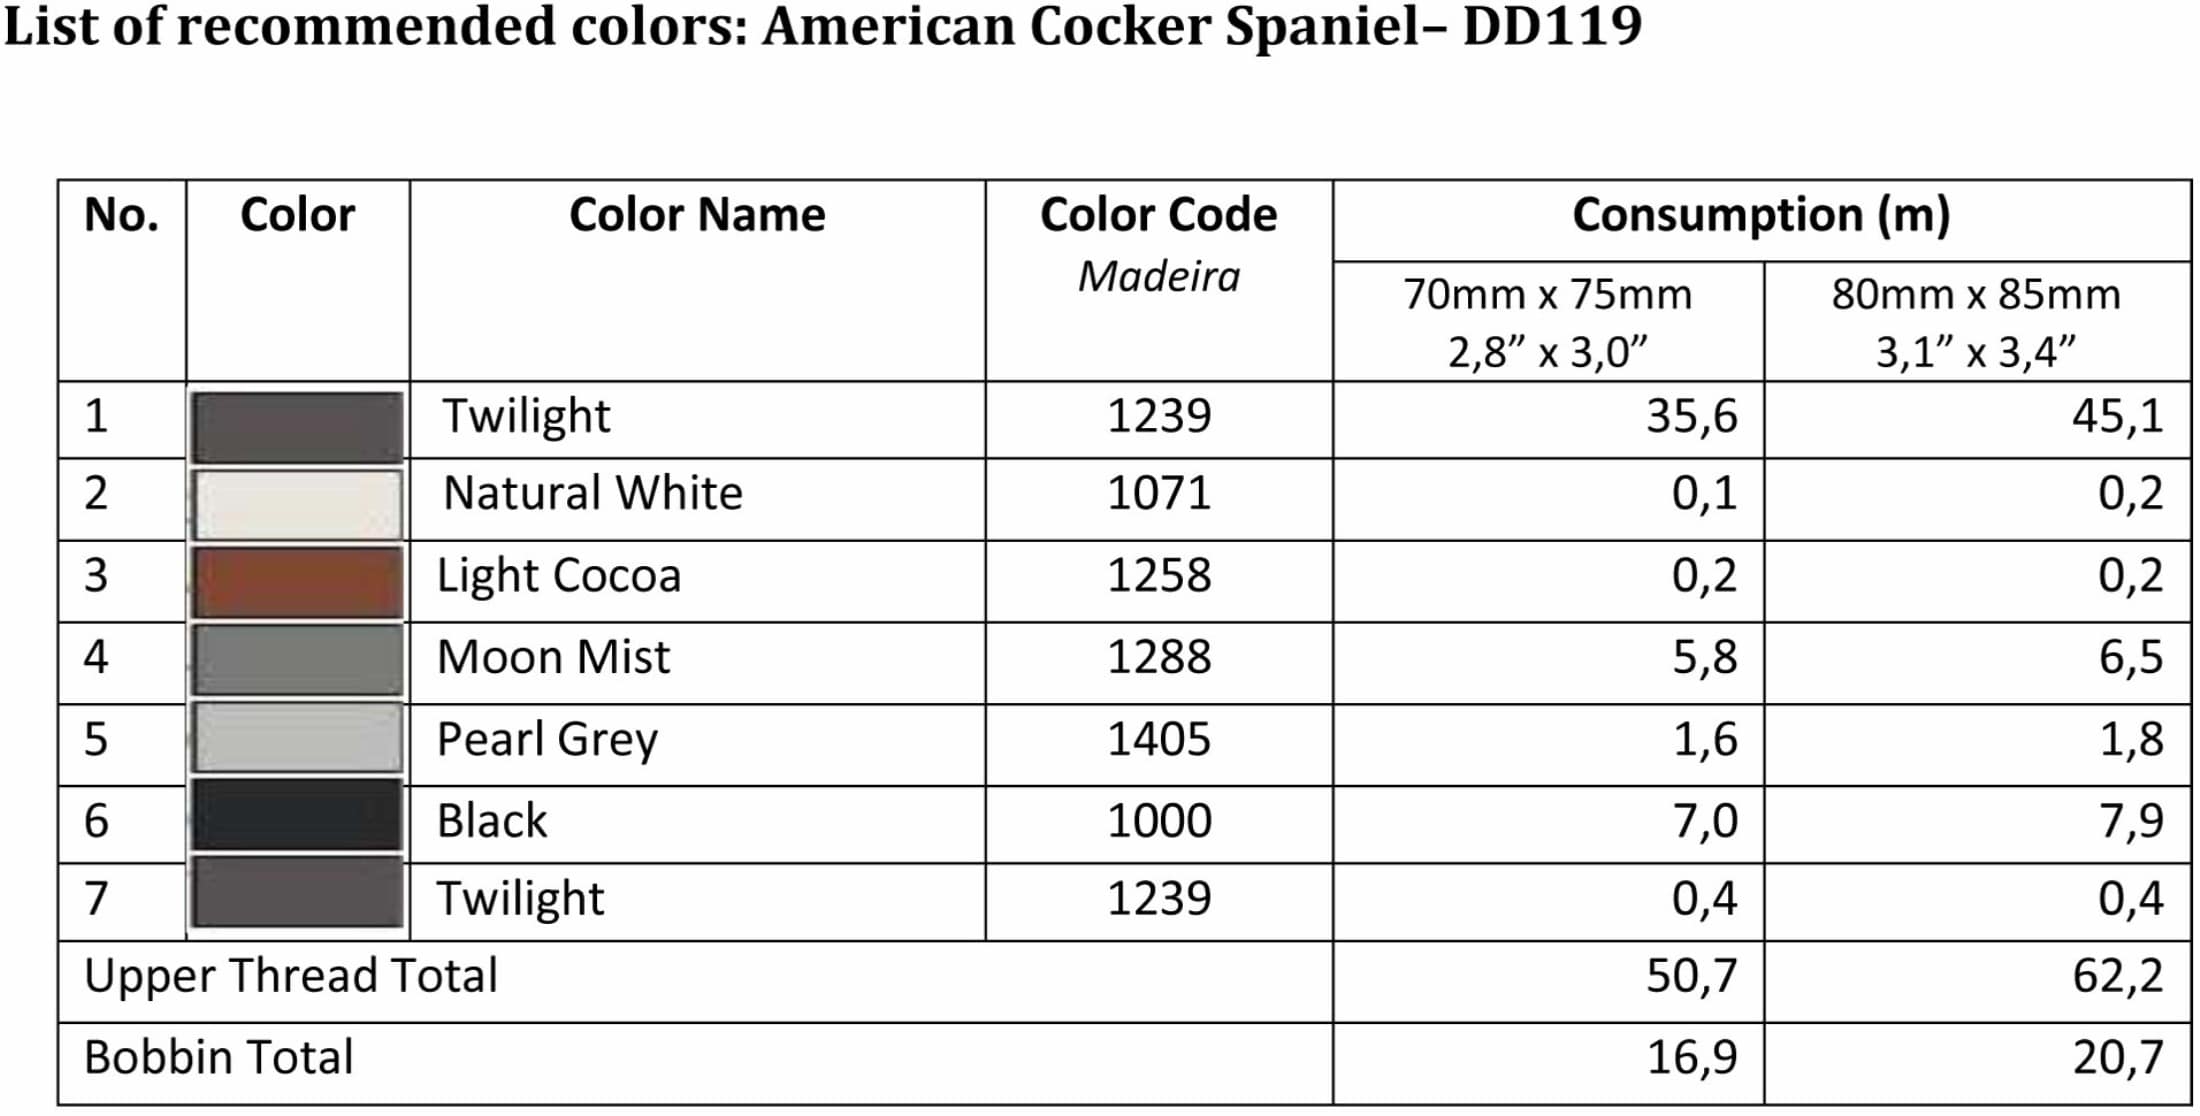 List of Recommended Colors - American Cocker Spaniel  DD119